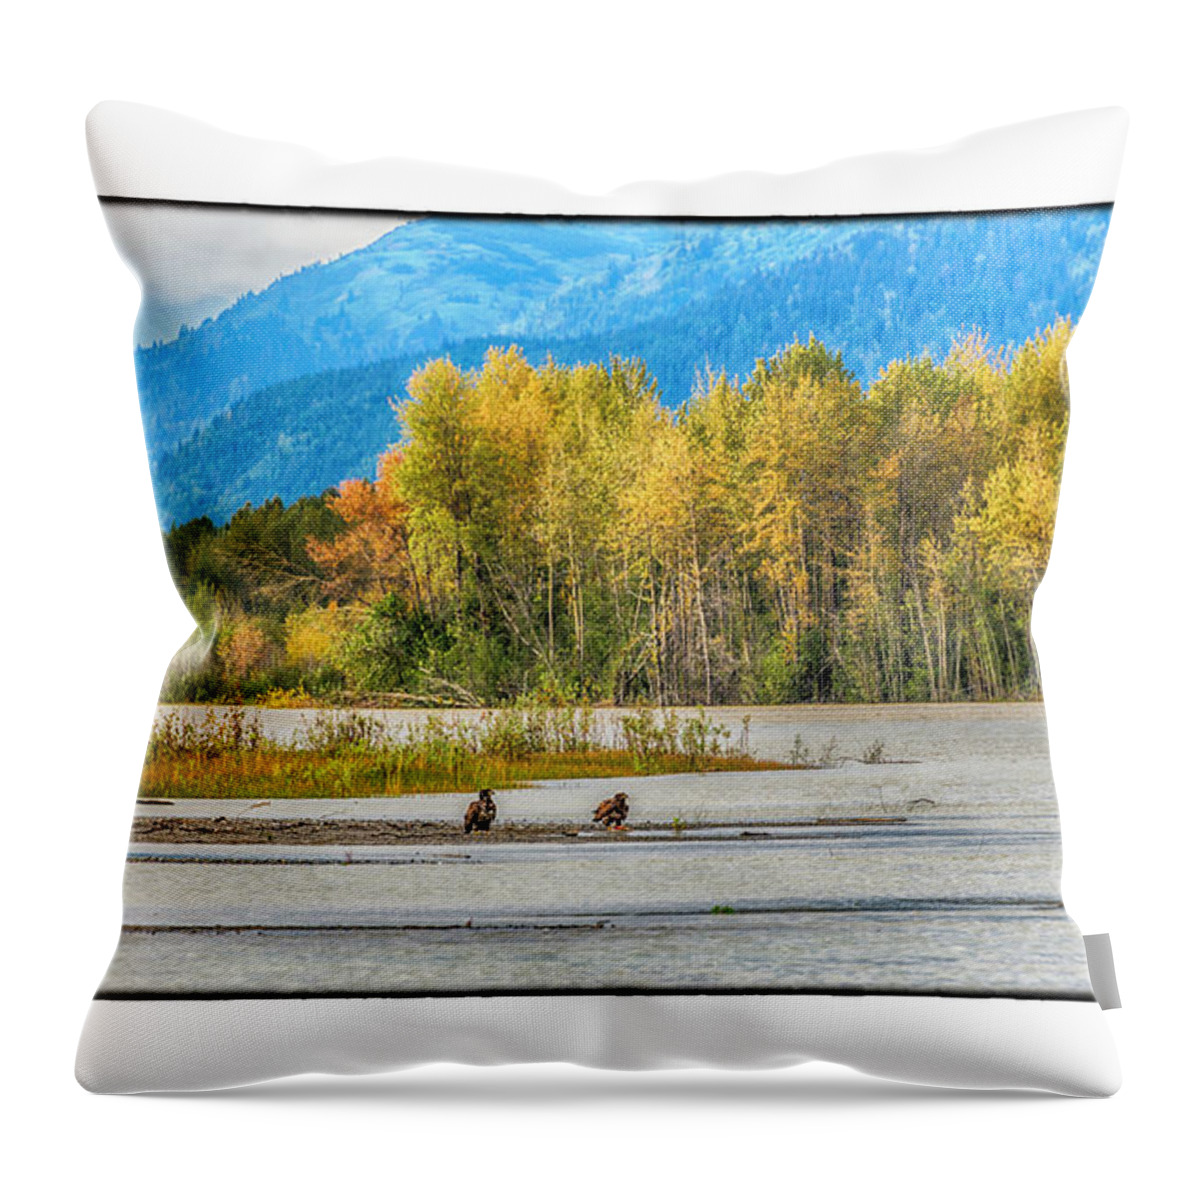 Eagles Throw Pillow featuring the photograph Young Eagles by R Thomas Berner